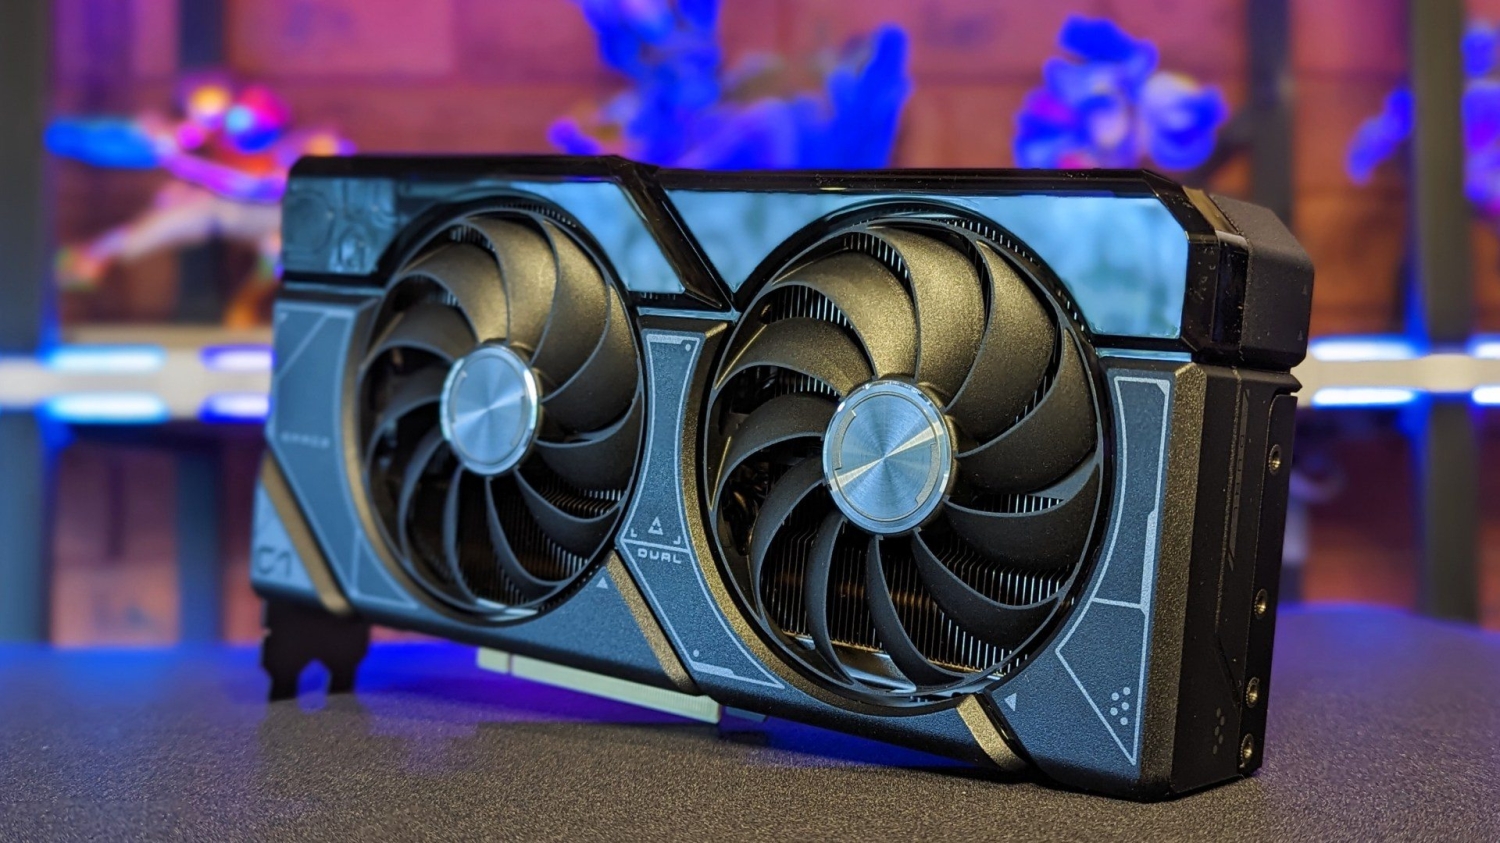 TweakTown Enlarged Image - The ASUS DUAL GeForce RTX 4070 is one of many RTX 4070 models now being sold in the US for $549.